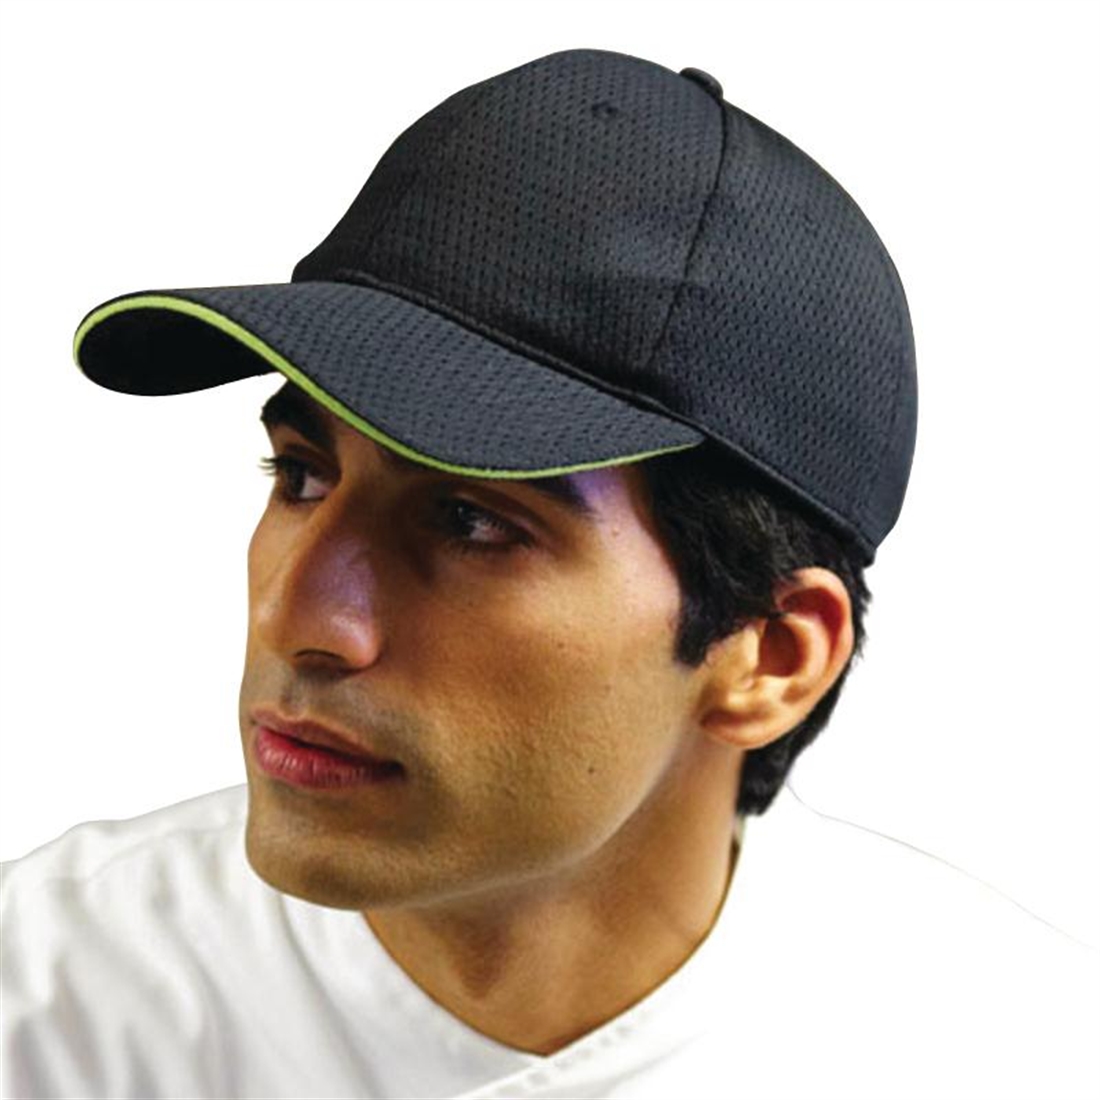 Chef Works Cool Vent Baseball Cap Black with Lime